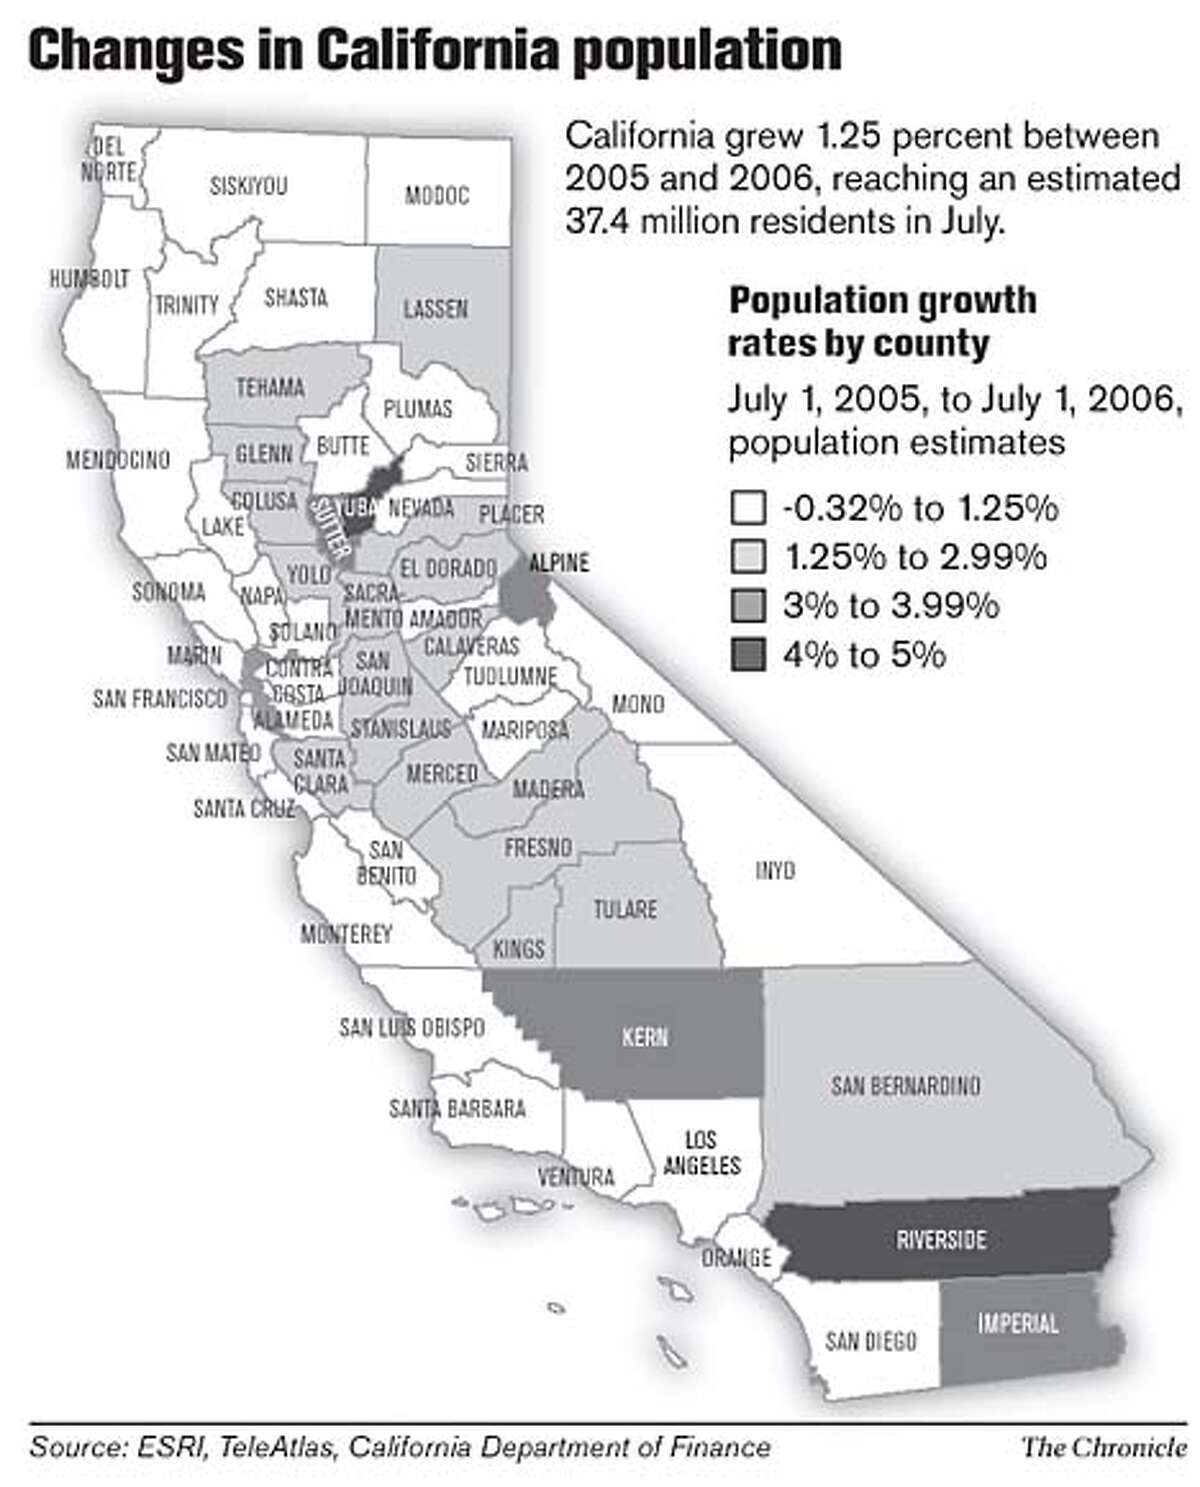 Changes in California Population. Chronicle Graphic